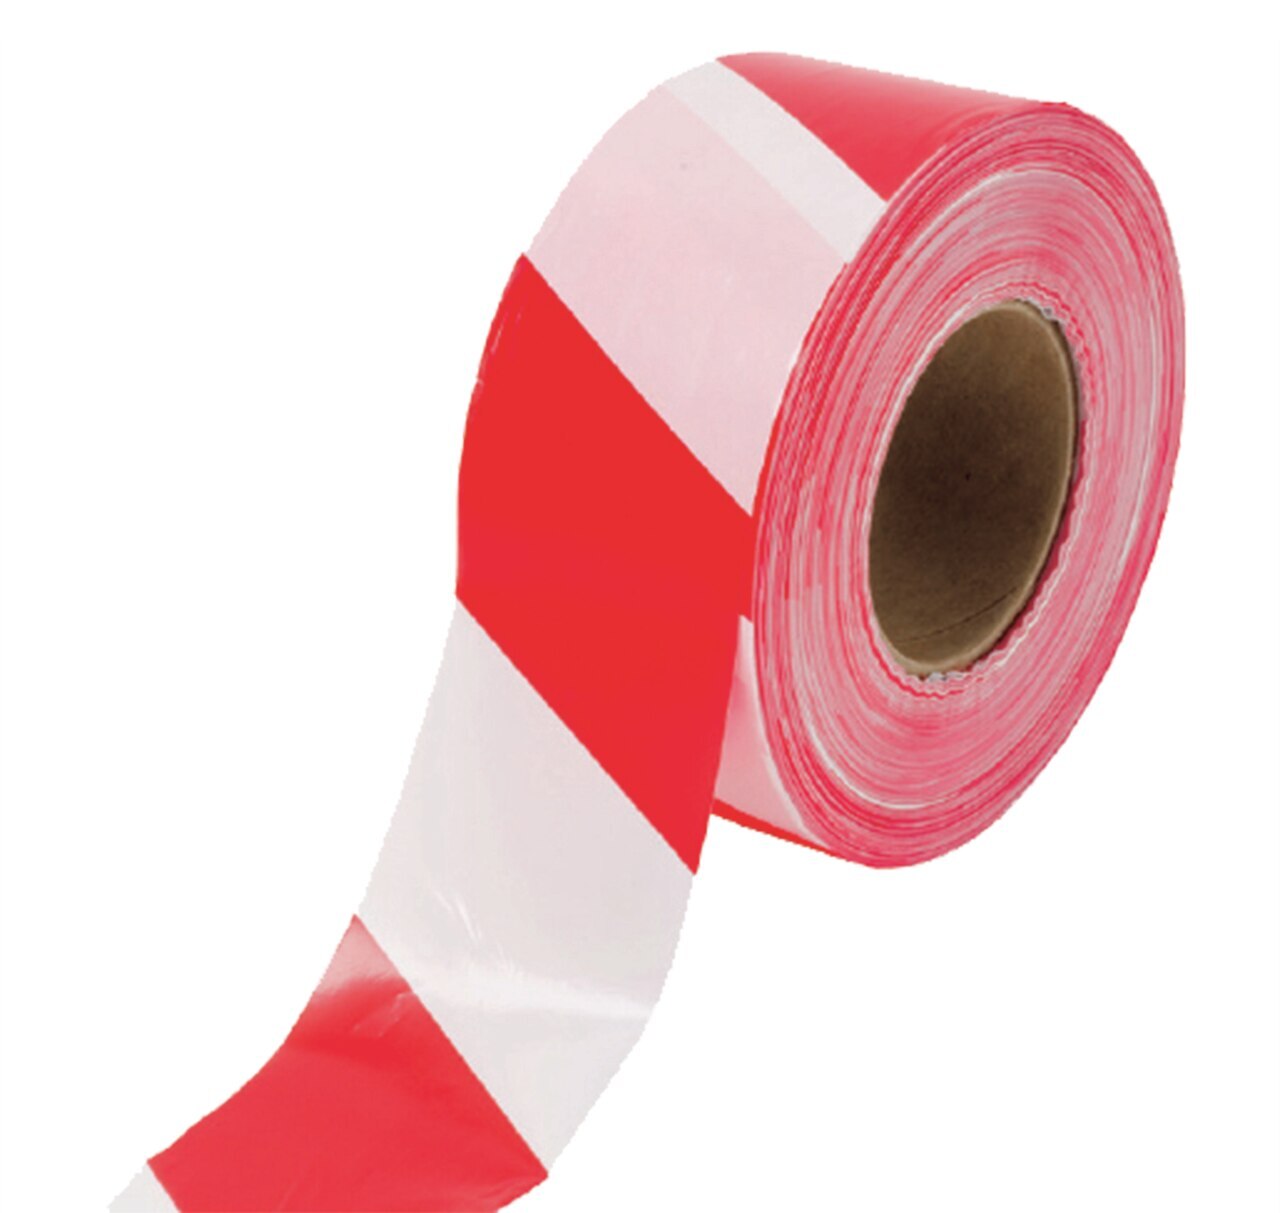 10 Metre Workplace Safety Reflective Tape - Red & White